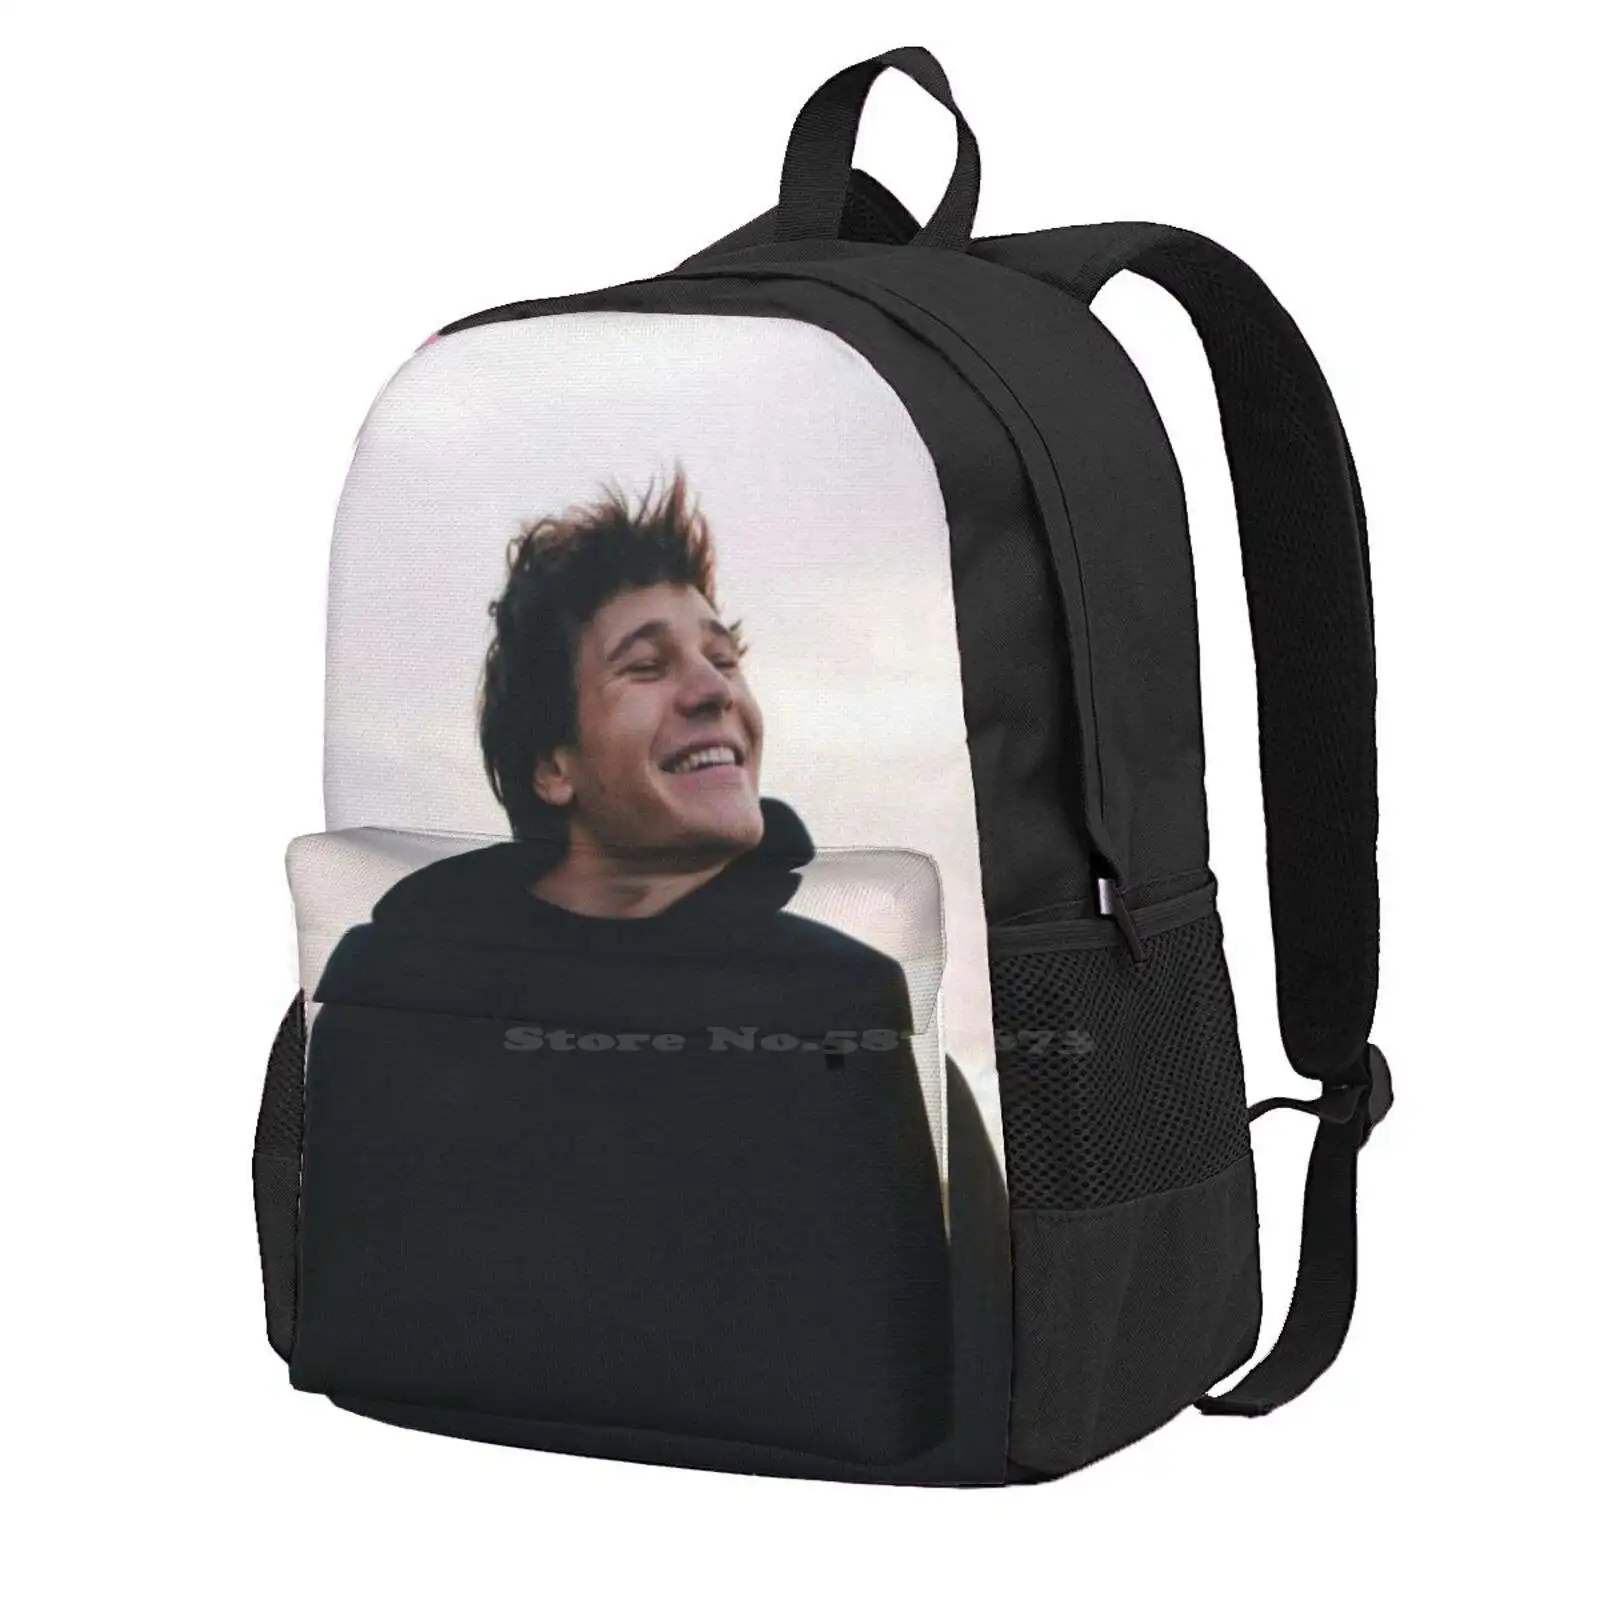 

Wincent Weiss Bag Backpack For Men Women Girls Teenage Vincent Knows Wincent Singer Who If Not We Mark Forster The Voice Thw